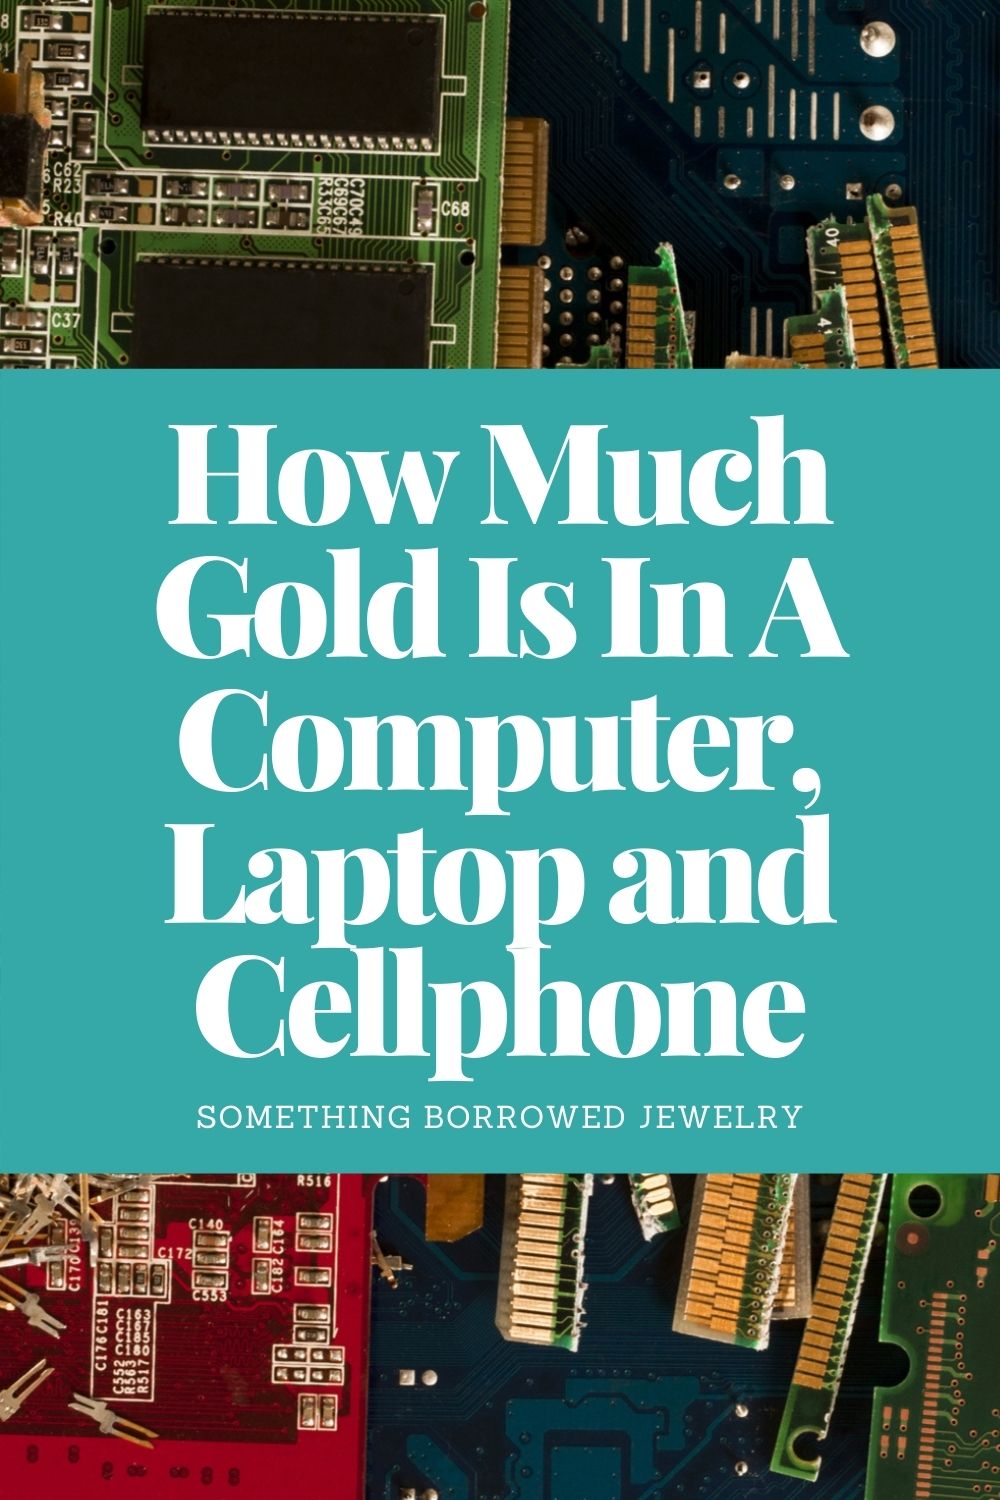 How Much Gold Is In A Computer, Laptop and Cellphone pin 2